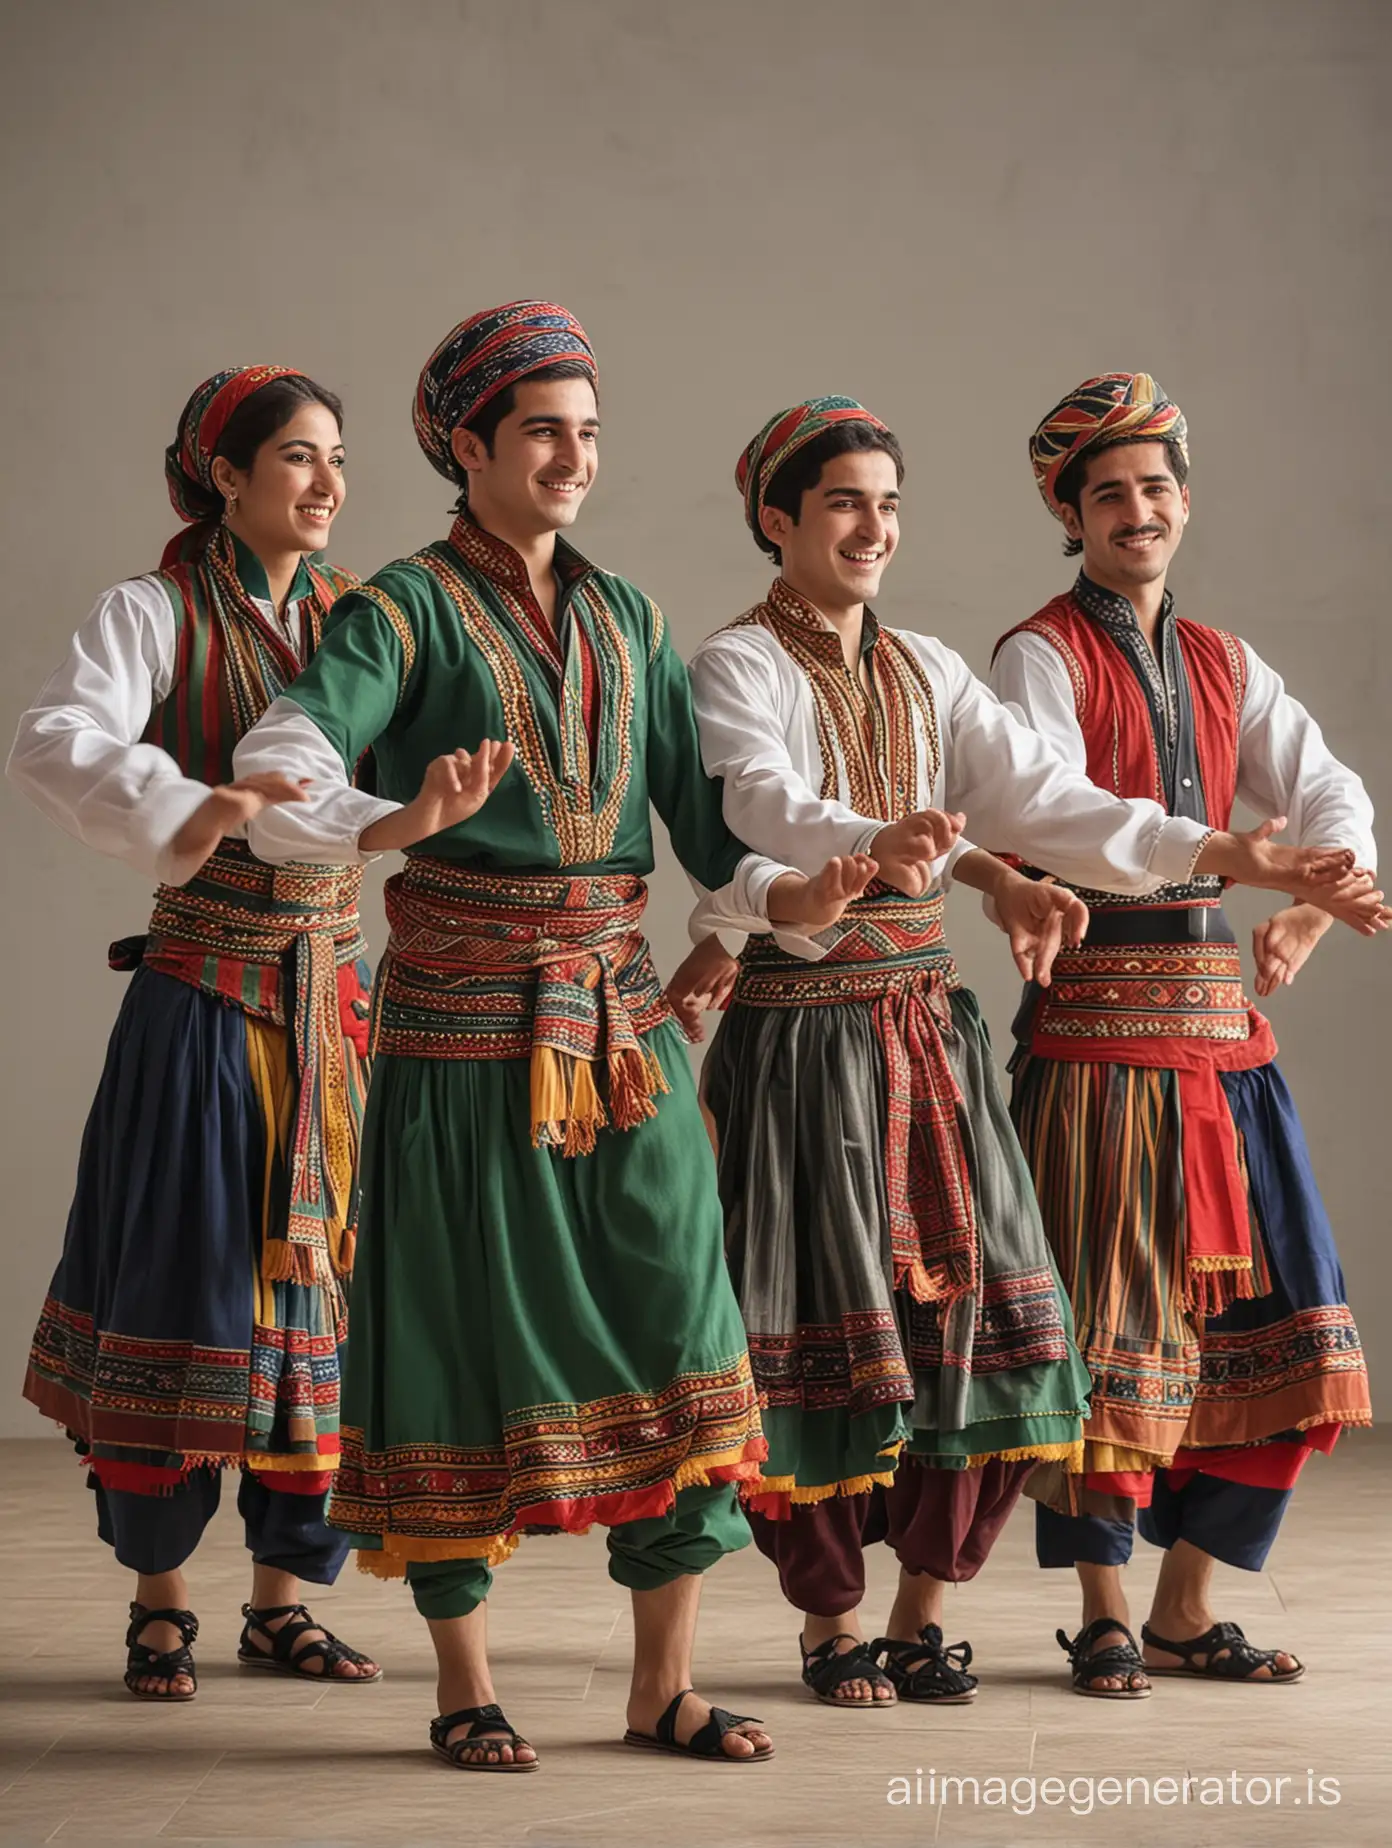 show me group of Kurdi   dancer men and women dancing from iran in the traditional dress